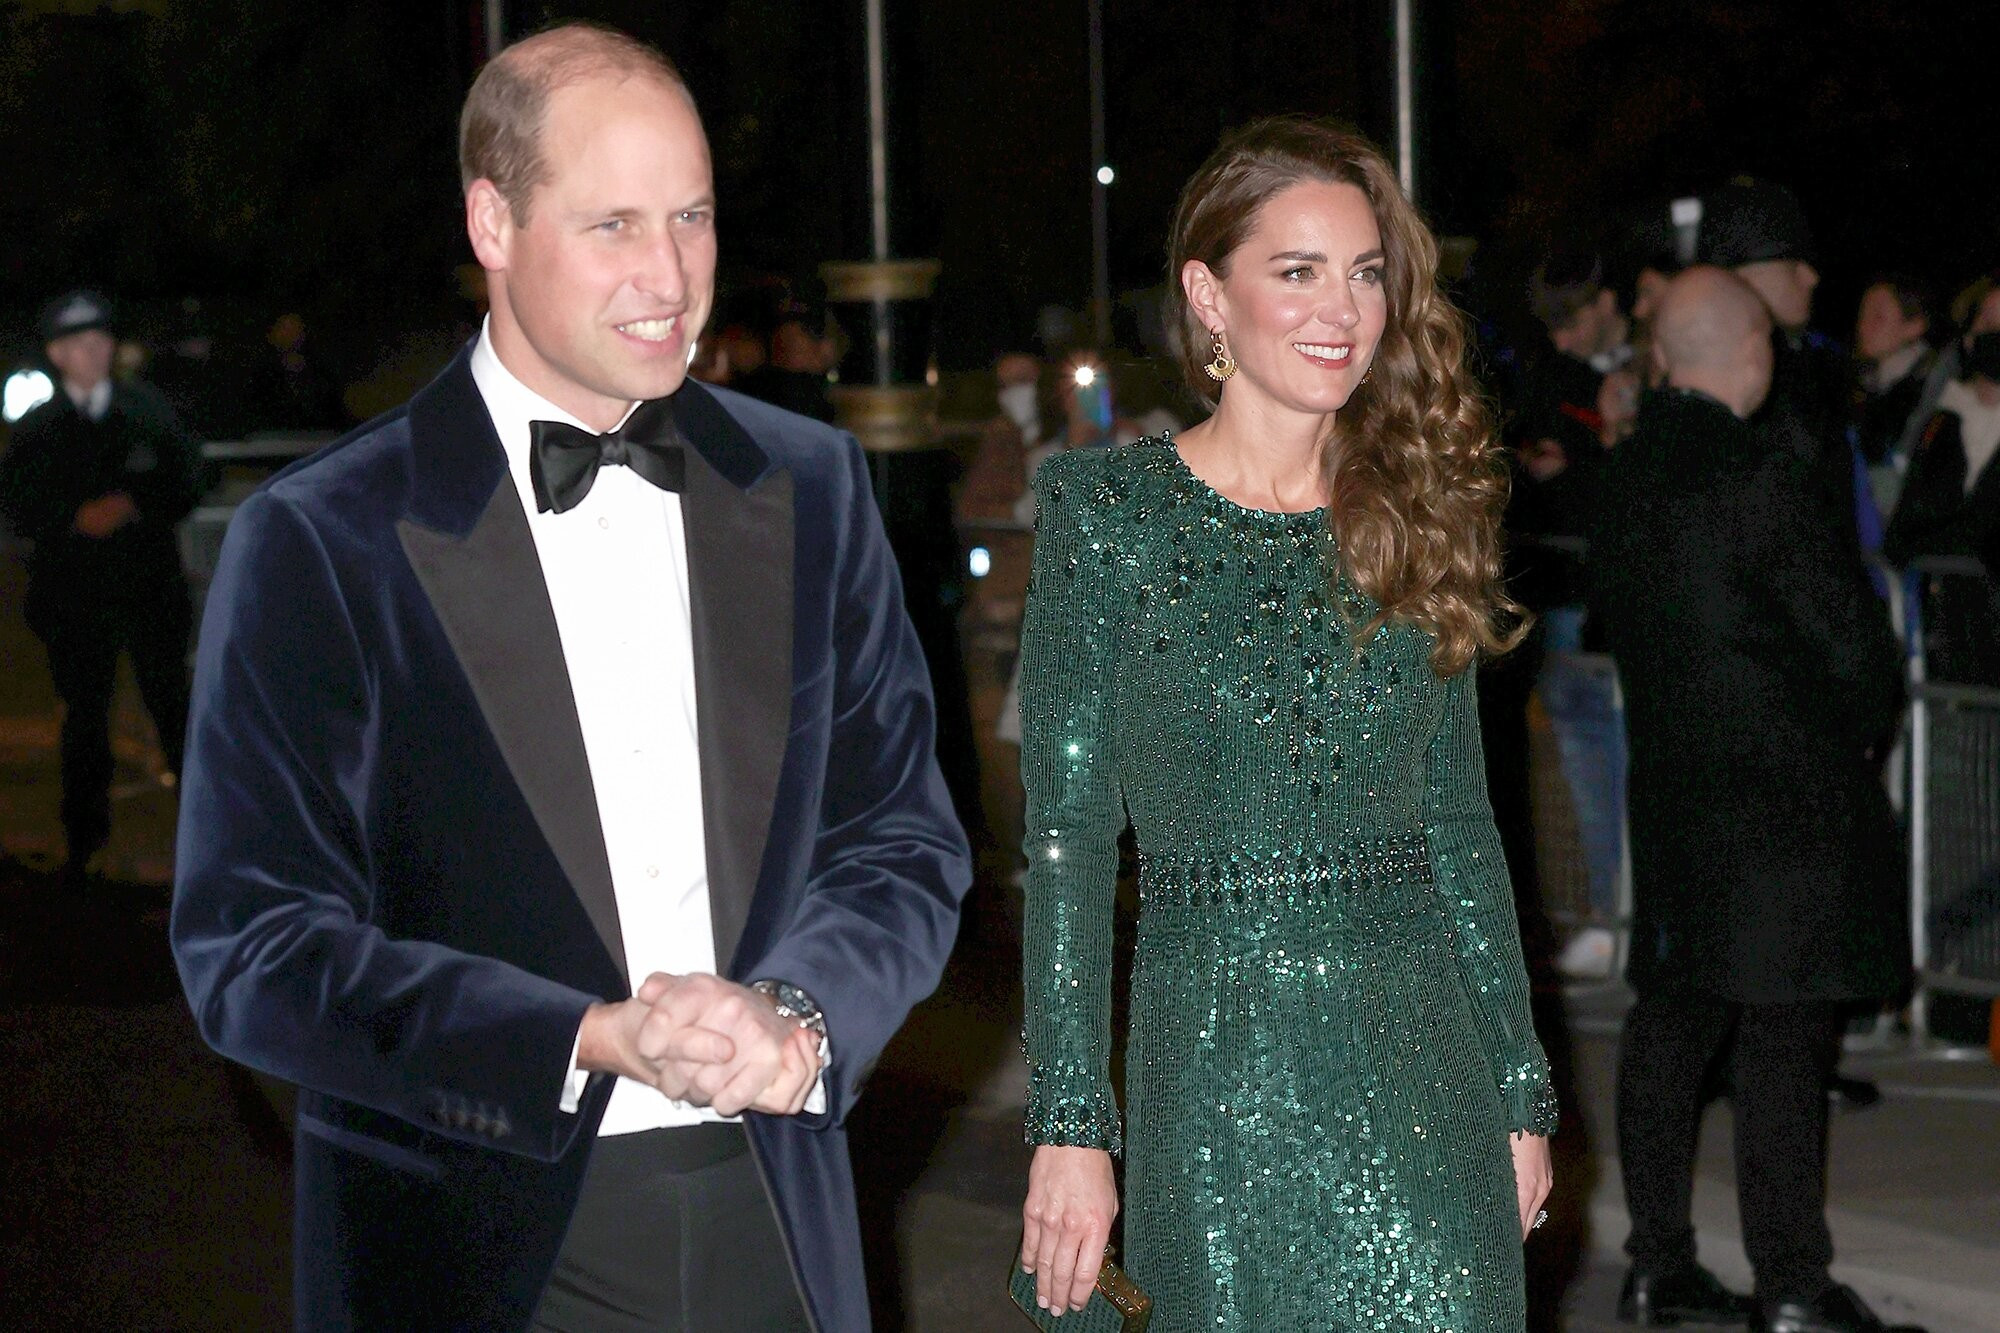 prince william fell in love with kate middleton after seeing her in this dress